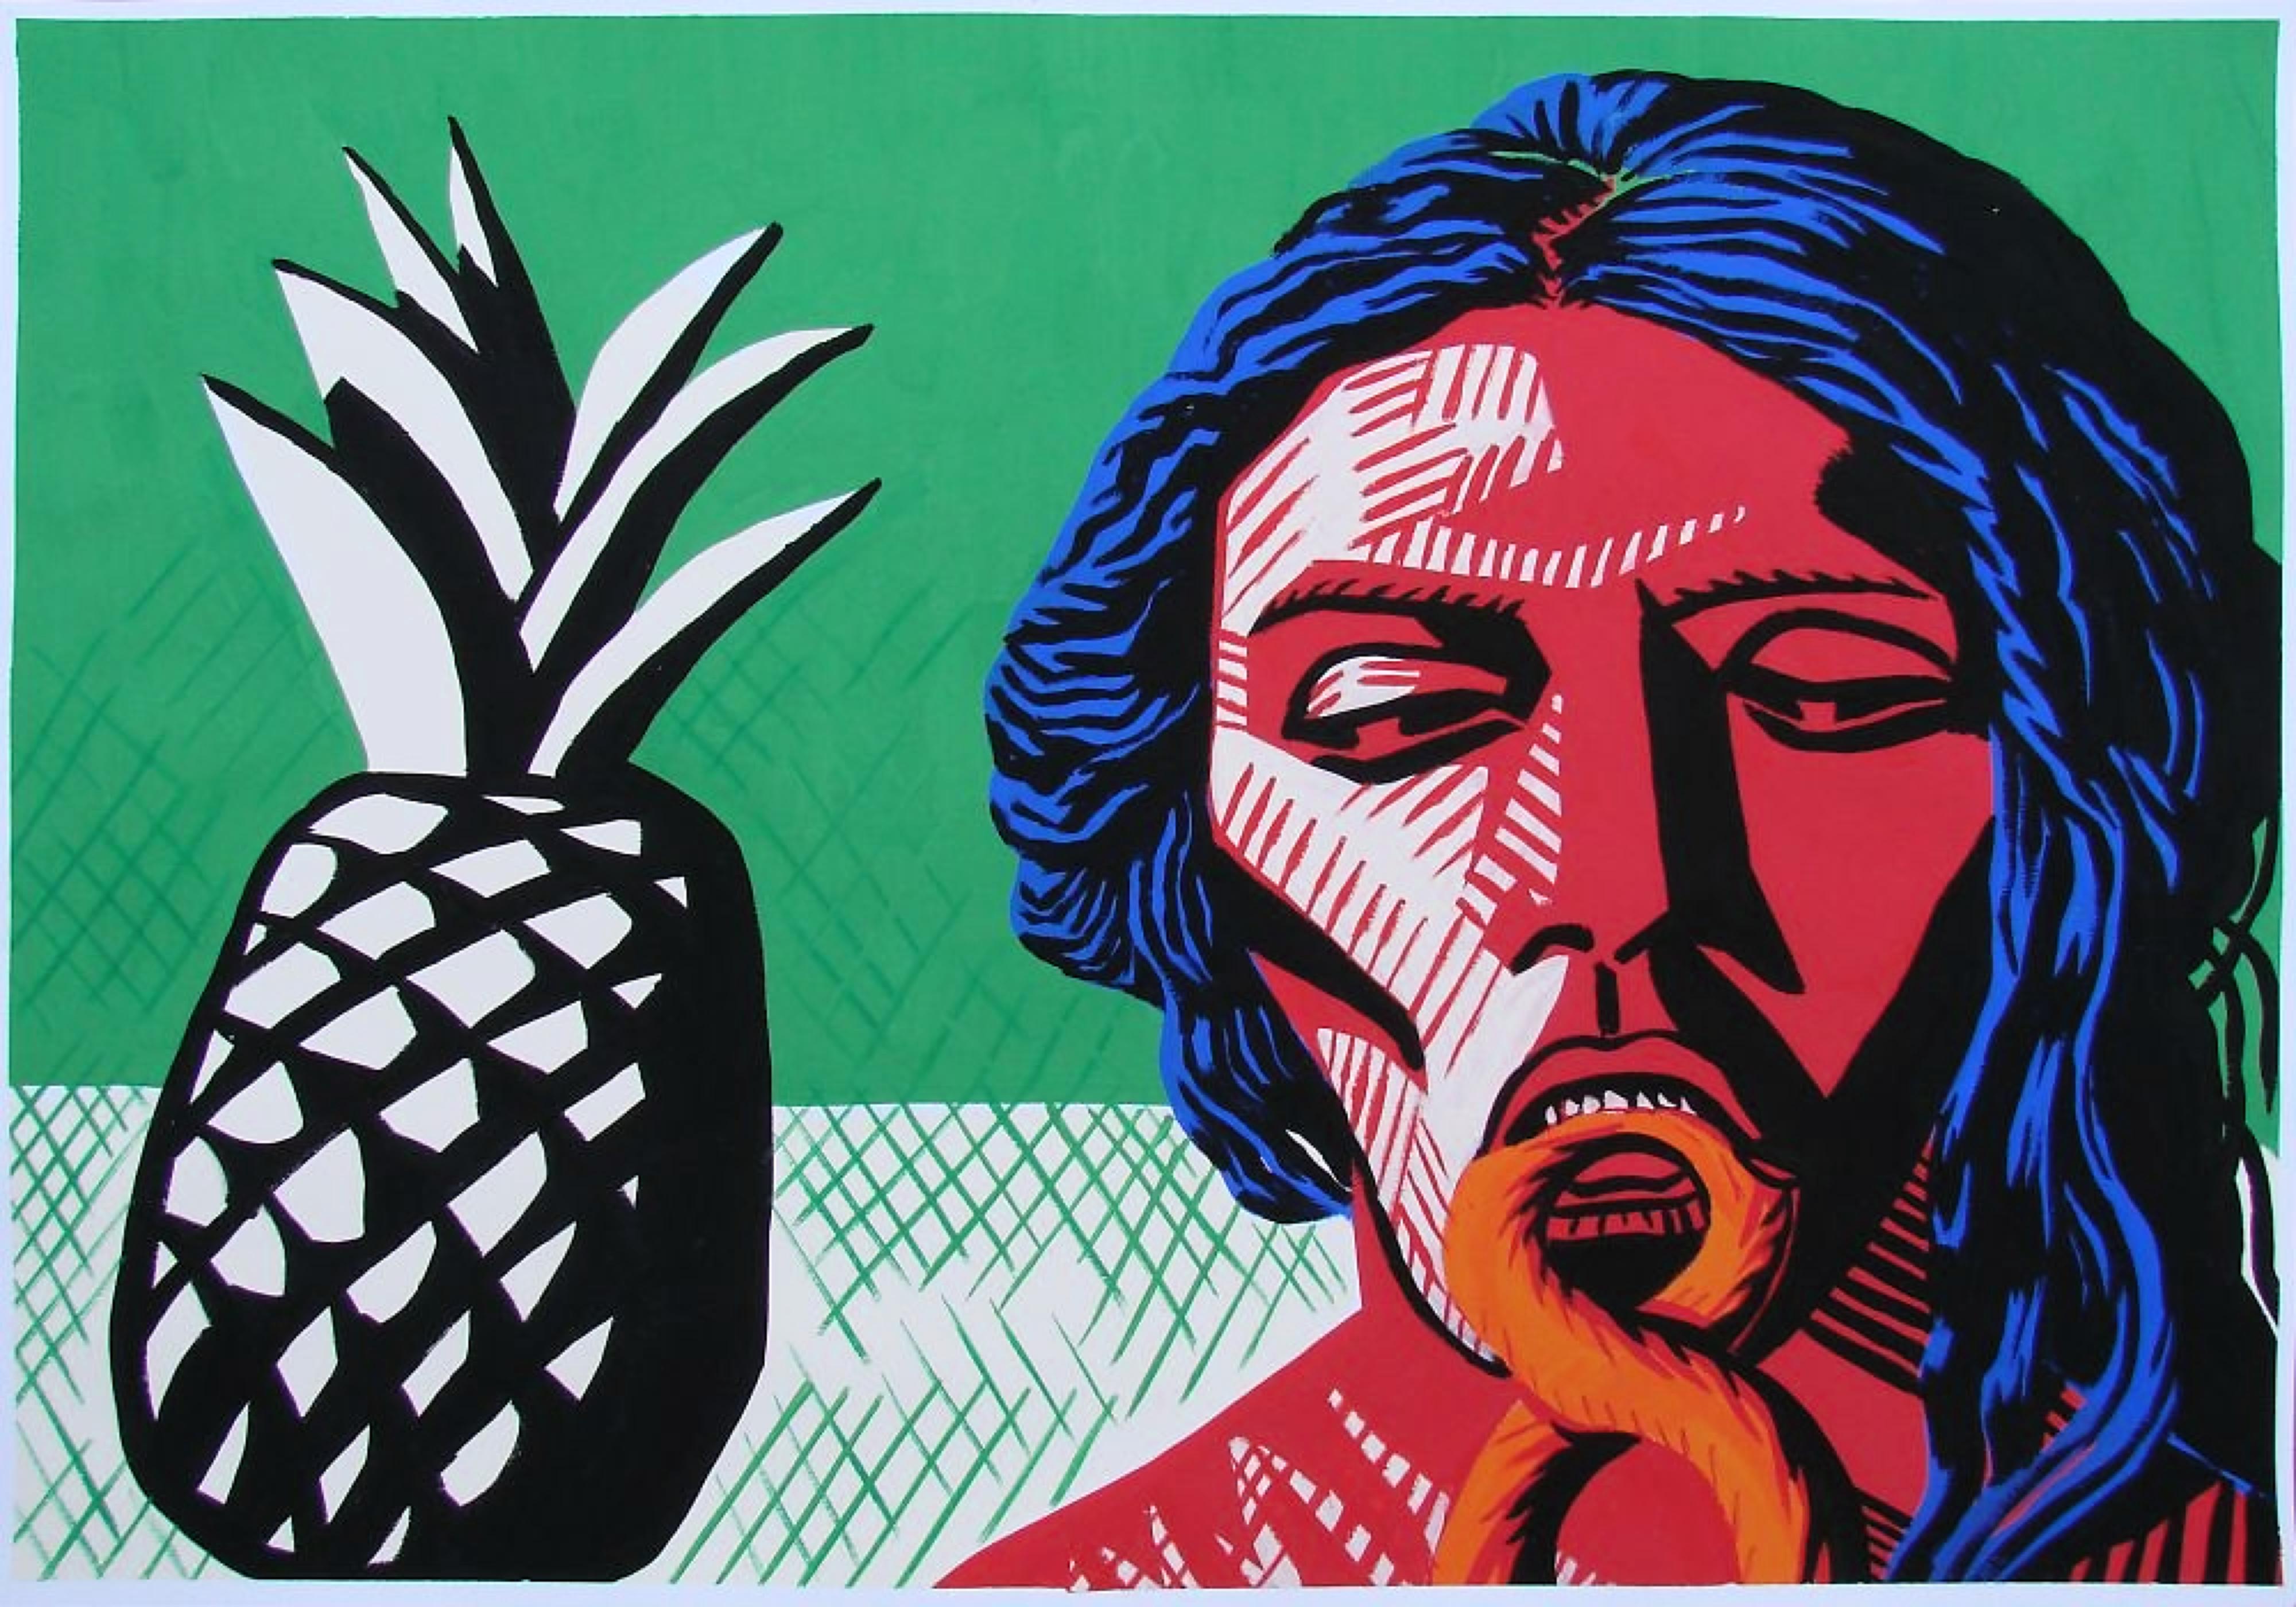 Disparate III - Contemporary, Figurative, Ananas, Green, Red, Portrait, Male